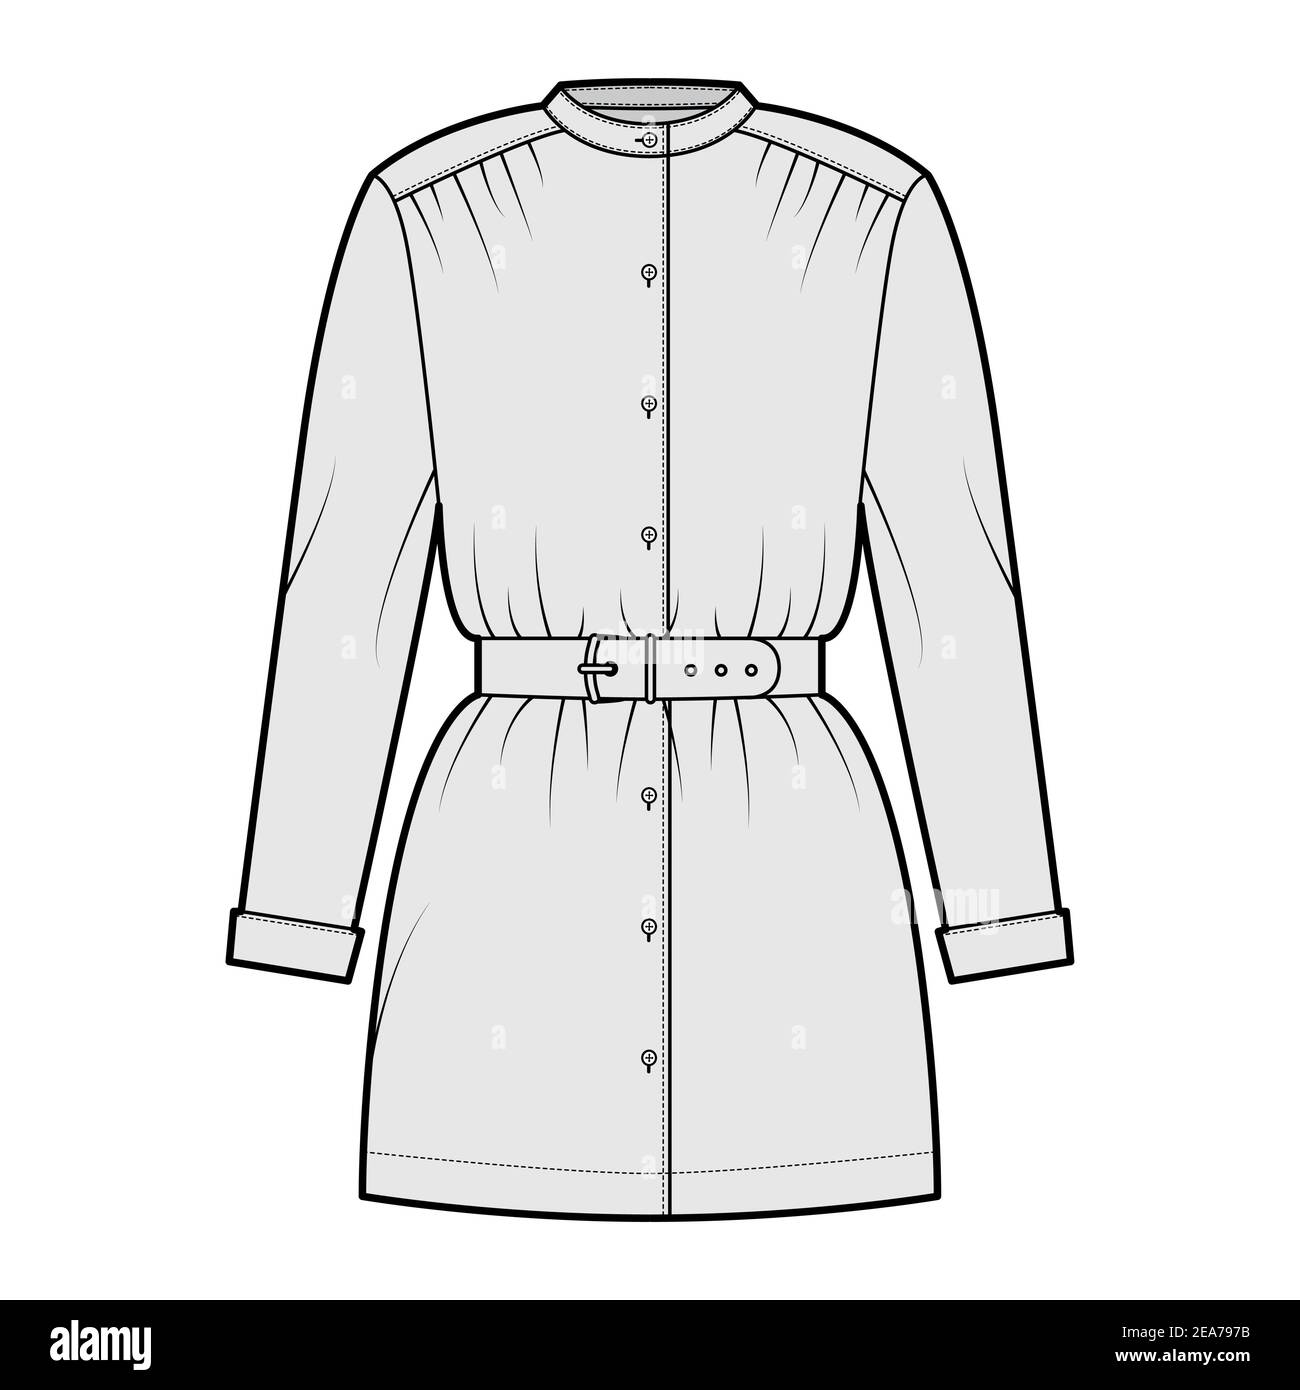 Belted sleeves Stock Vector Images - Alamy